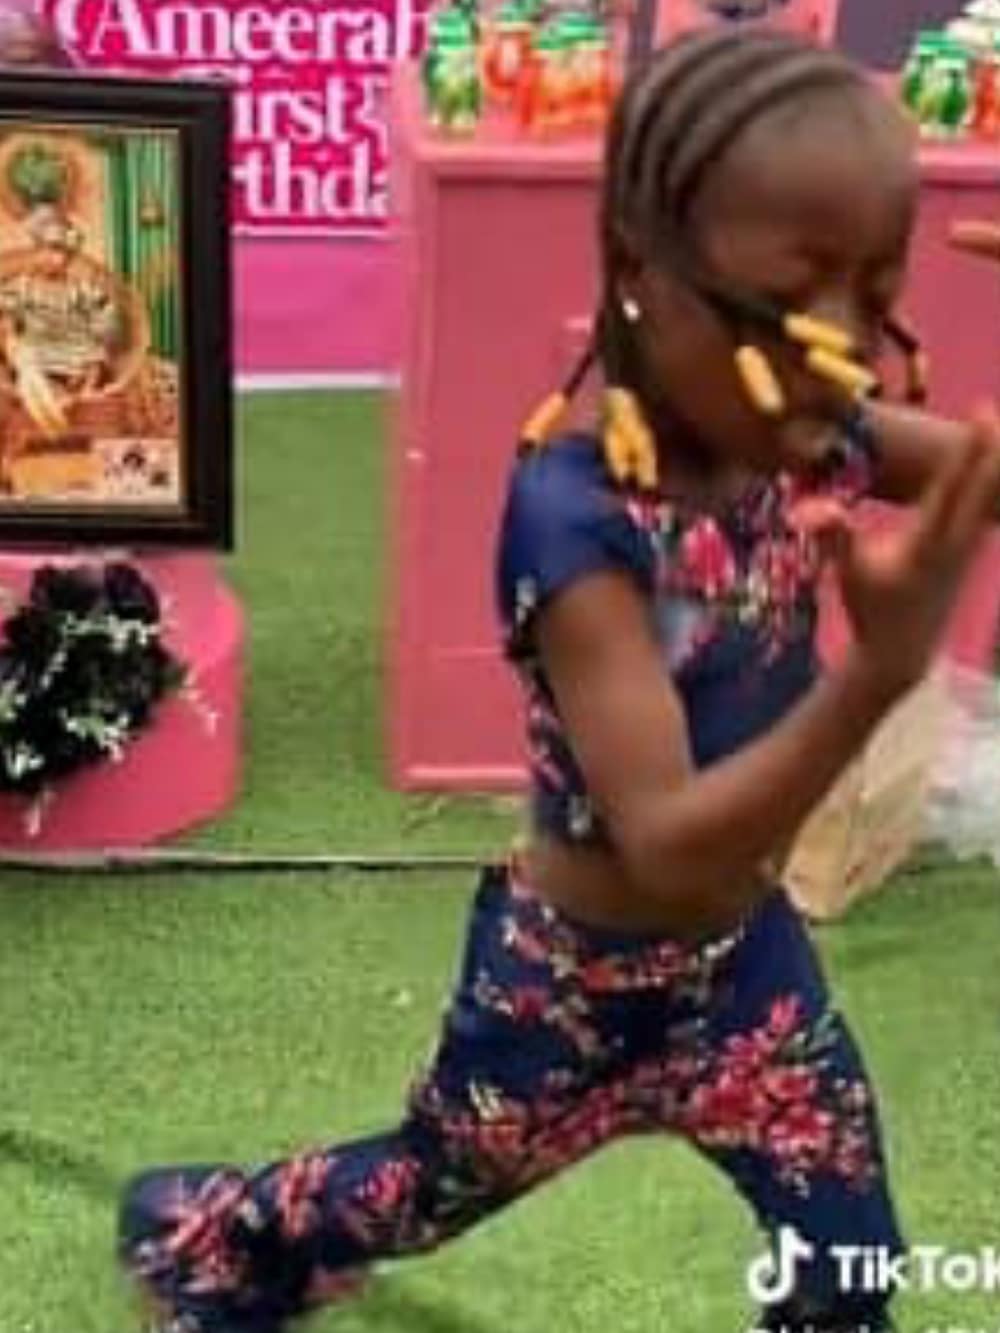 How a little girl steals the show at a birthday party with her impressive dance moves (video)